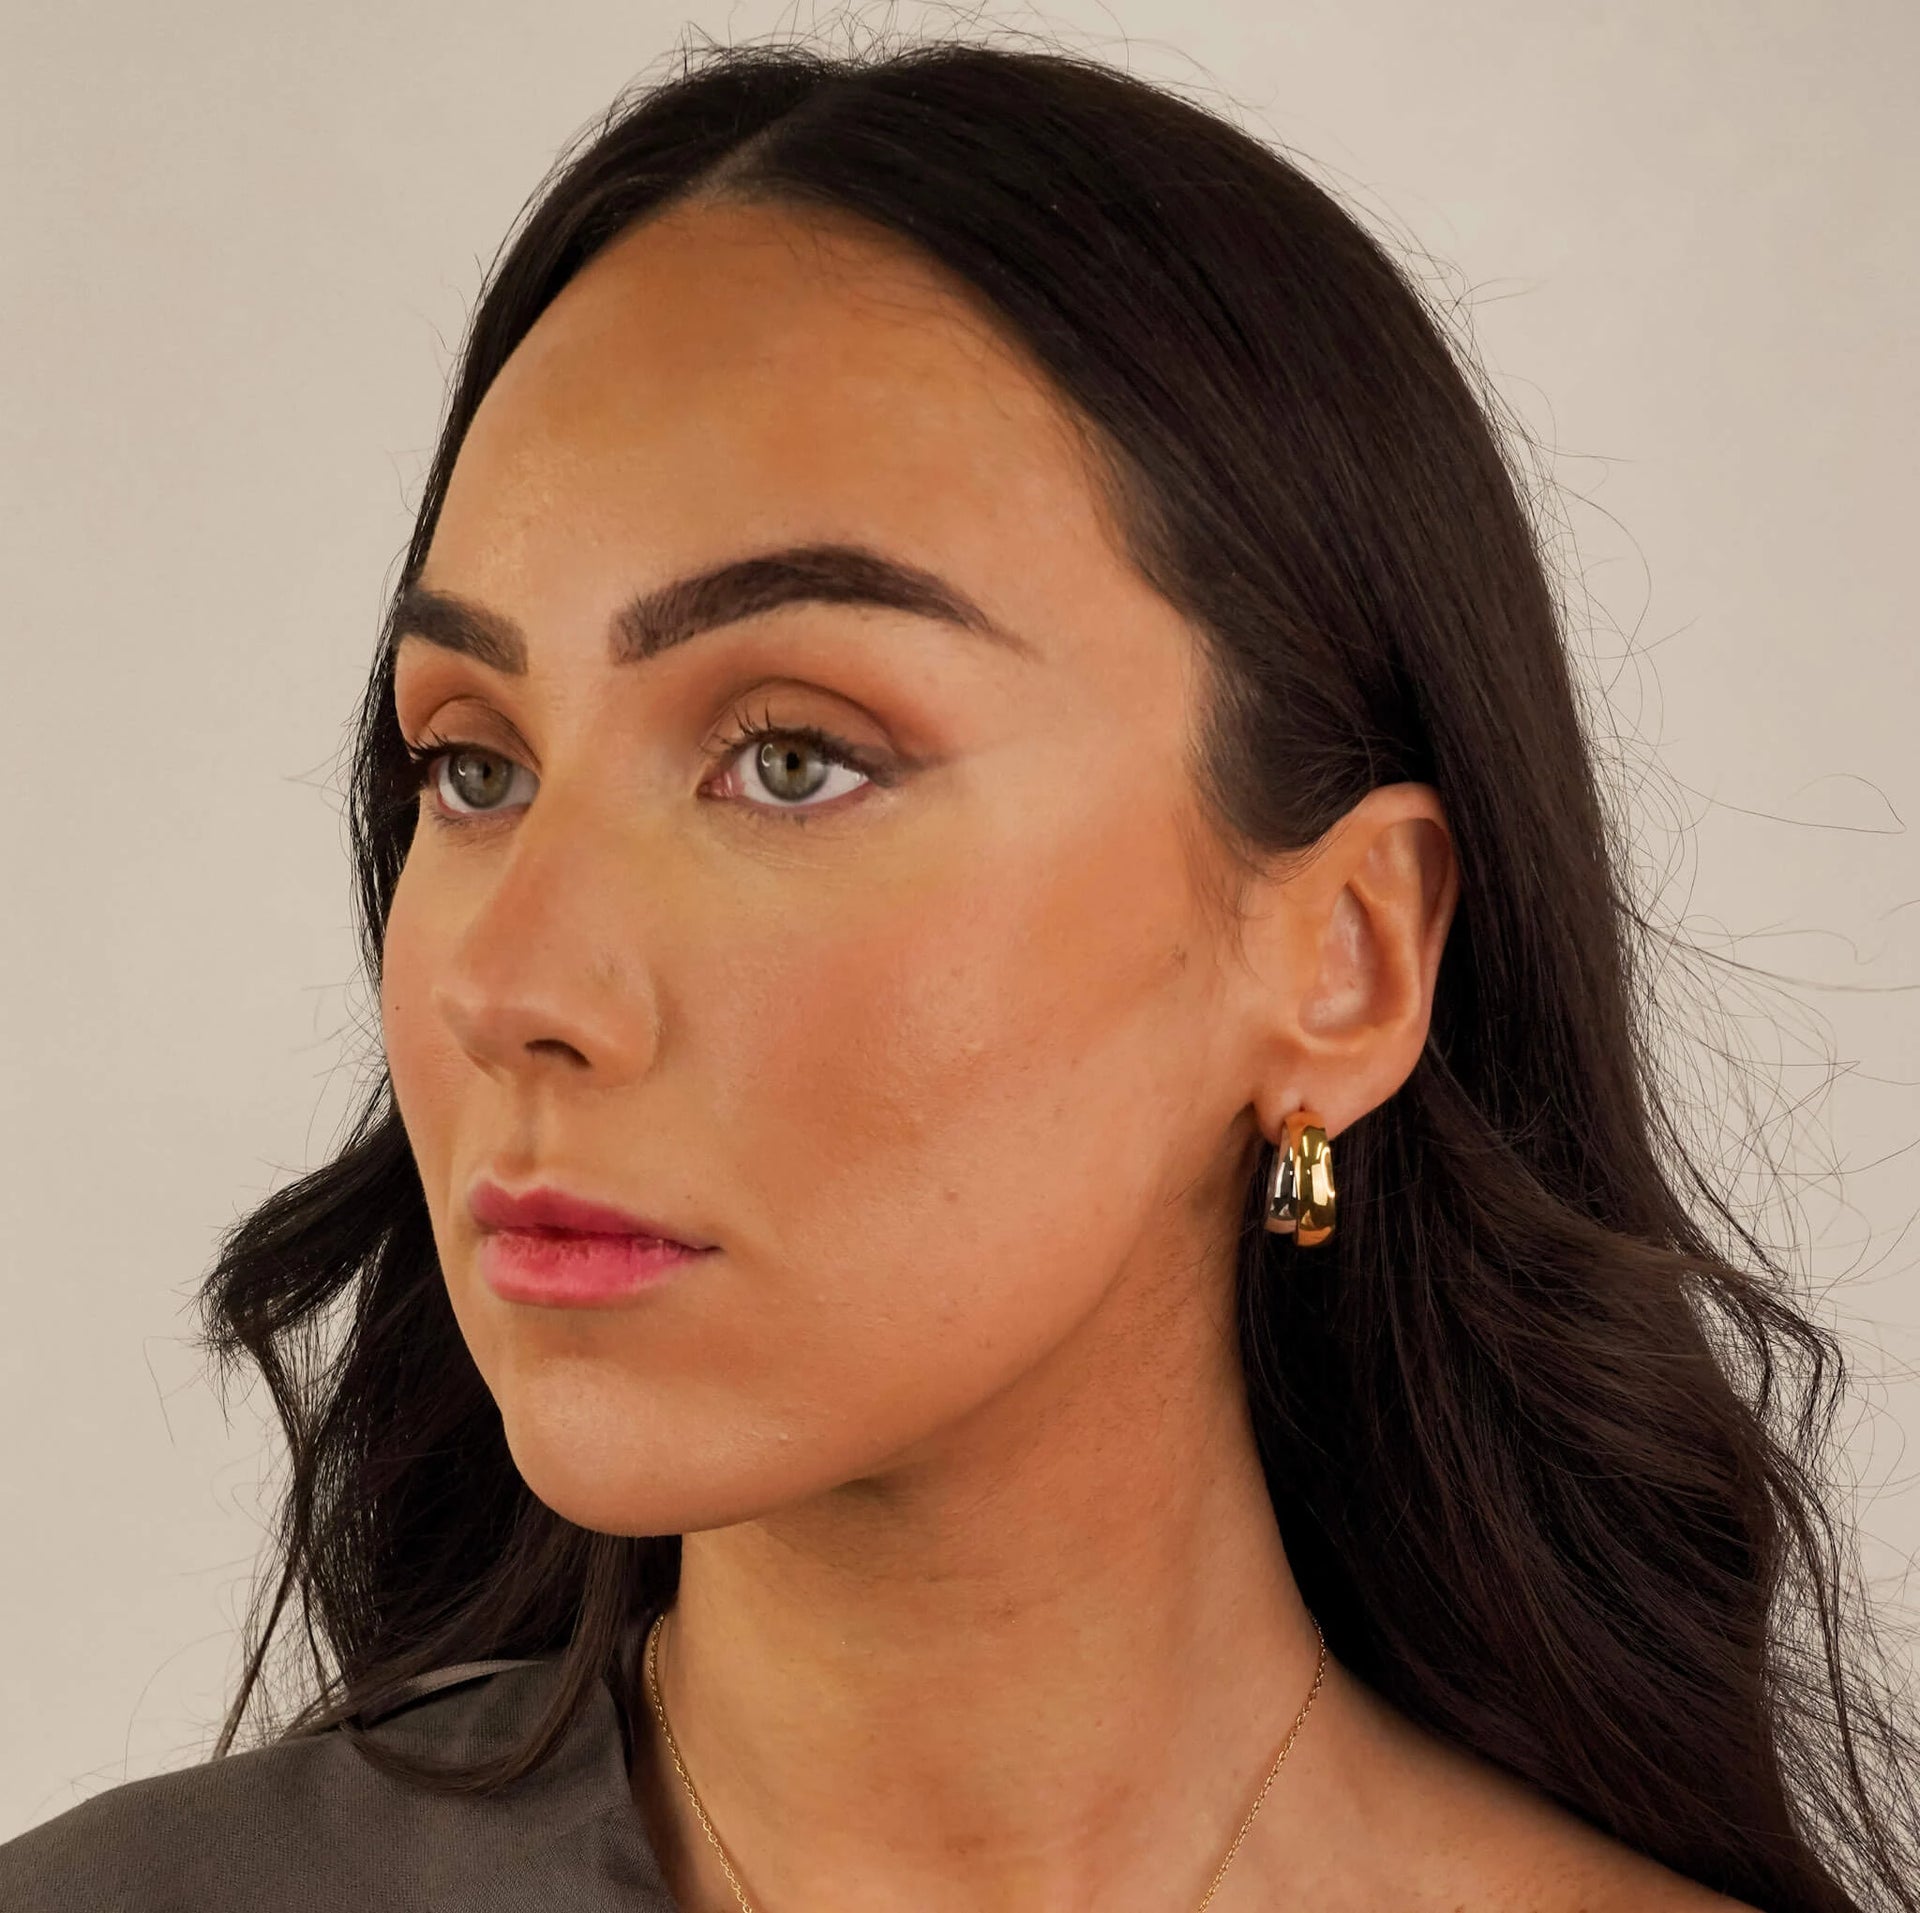 mettle & bloom offers a range of different styles and sizes of earrings. This Irish brand has become well known and popular for earrings because everything is hypoallergenic and stylish.  